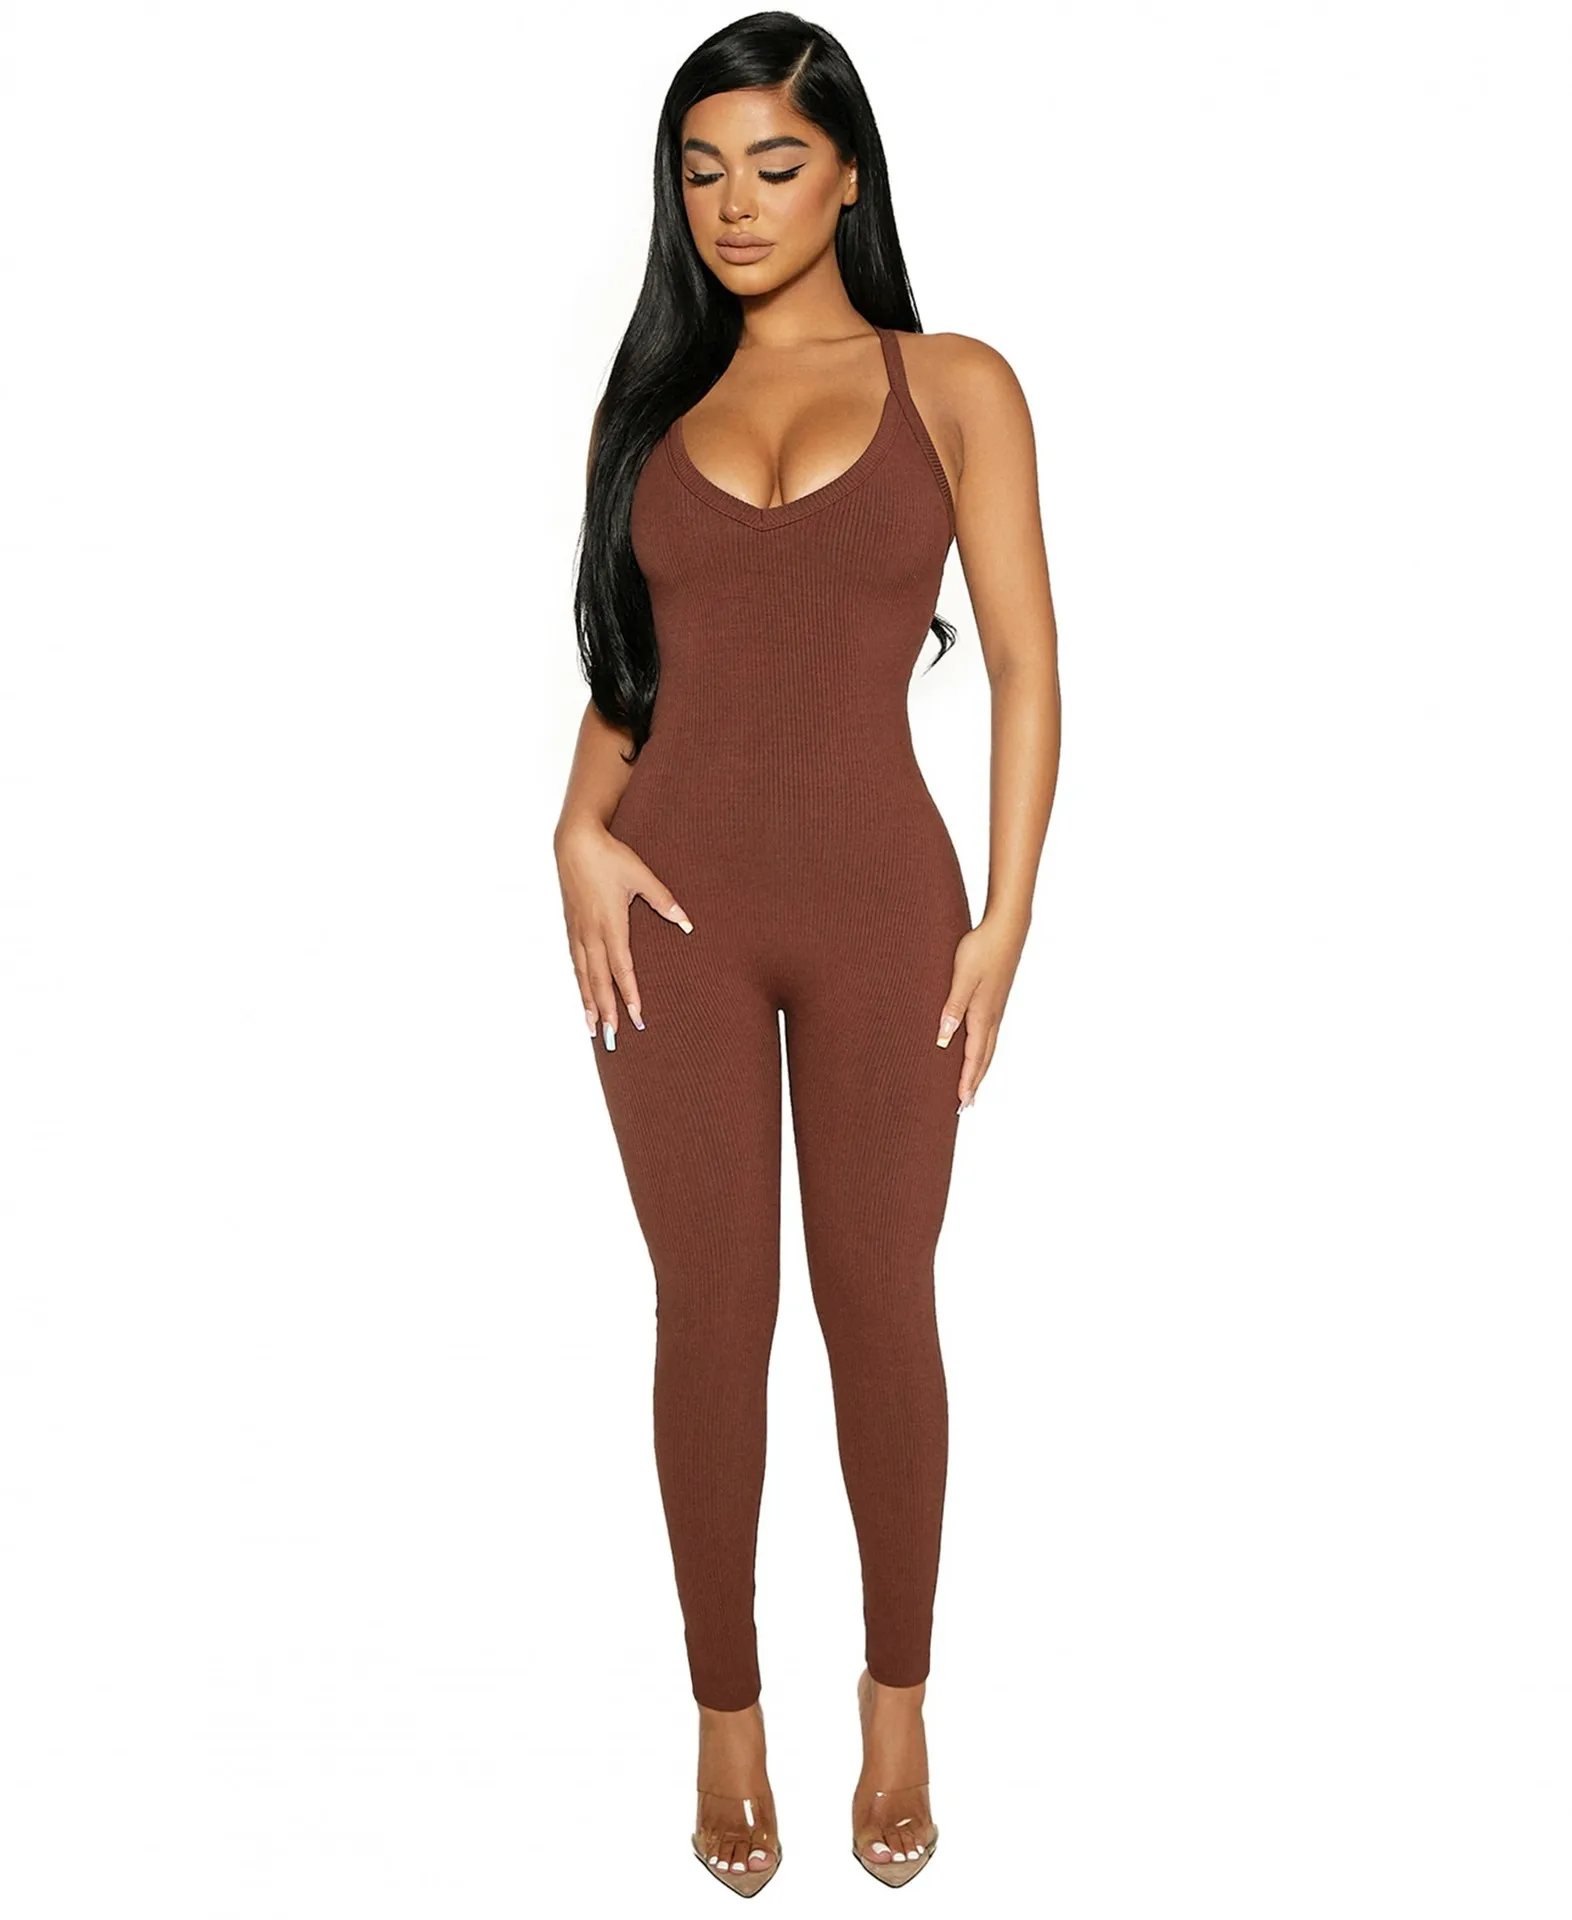 

2021 Women New Arrivals Sexy Summer Sleeveless Cross Bodycon Clubwear One Piece Jumpsuits for Female Wholesale OEM ODM